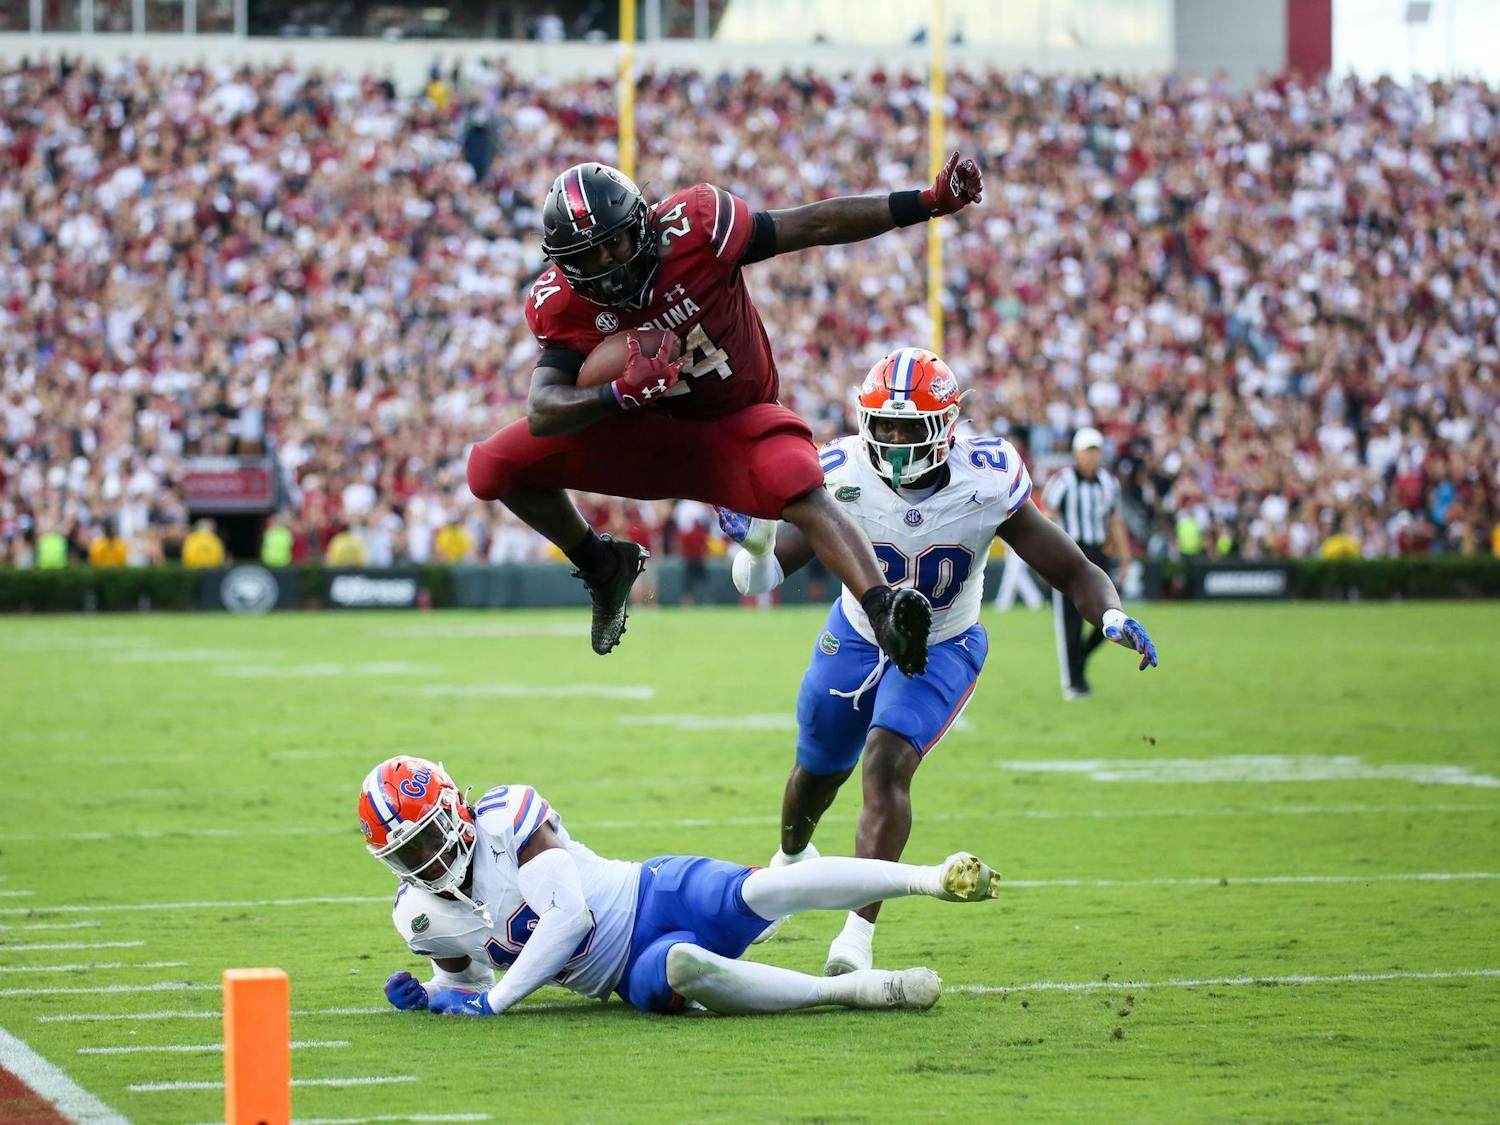 The South Carolina Gamecocks lost to the Florida Gators 41-39 in their fourth Southeastern Conference matchup of the season at Williams-Brice Stadium on Oct. 14, 2023. This loss puts the Gamecocks at 2-4 for the season.